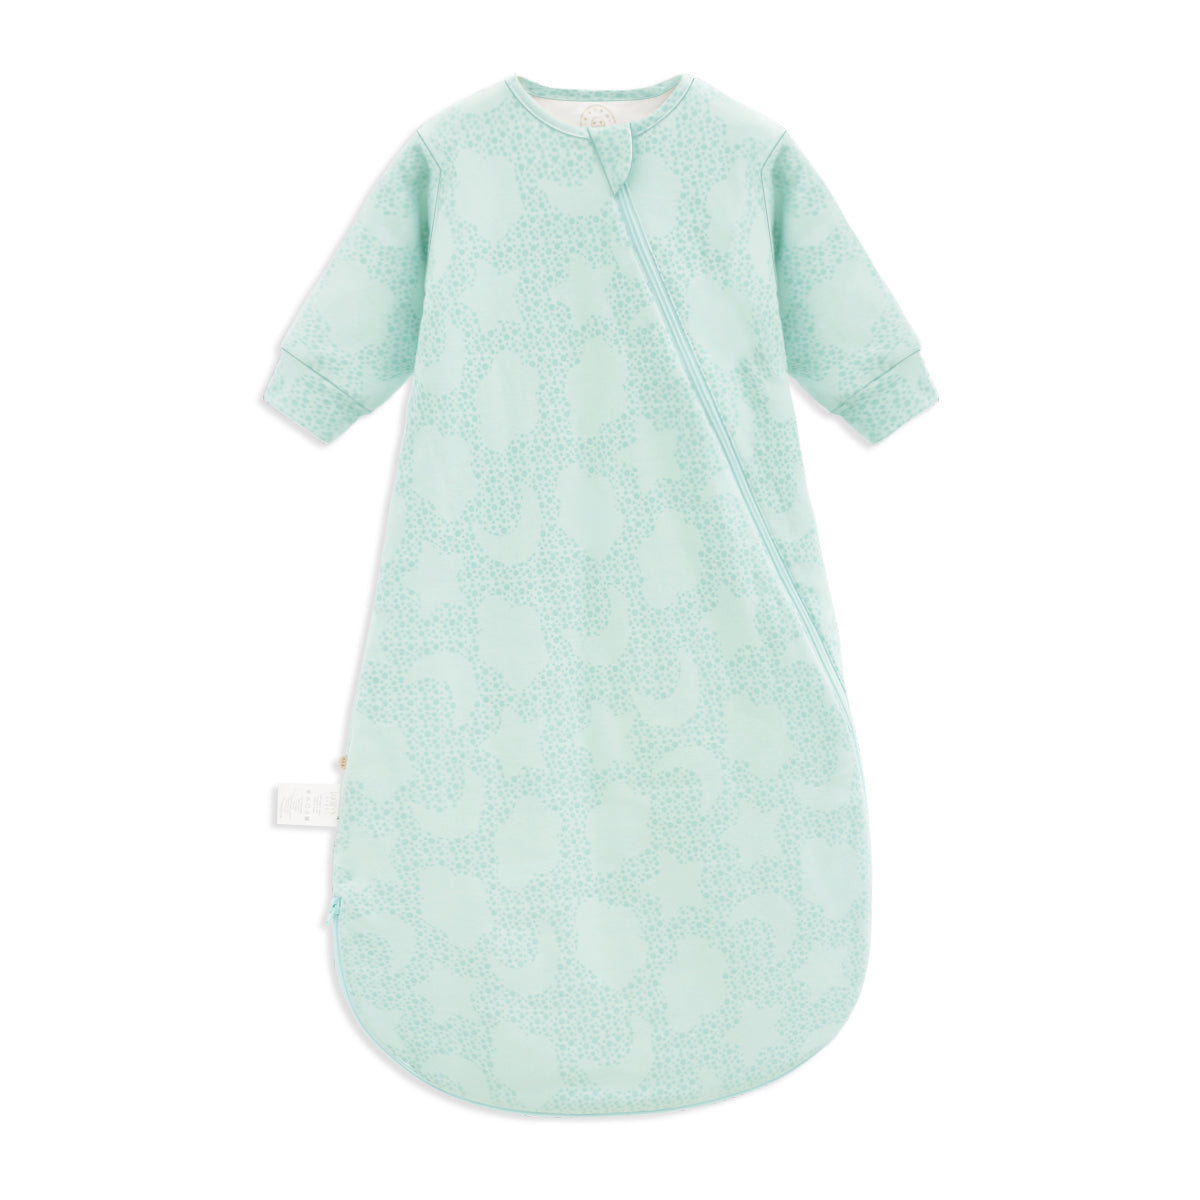 Weighted Sleep Sack With Sleeves 2.5 TOG - Mint Sky